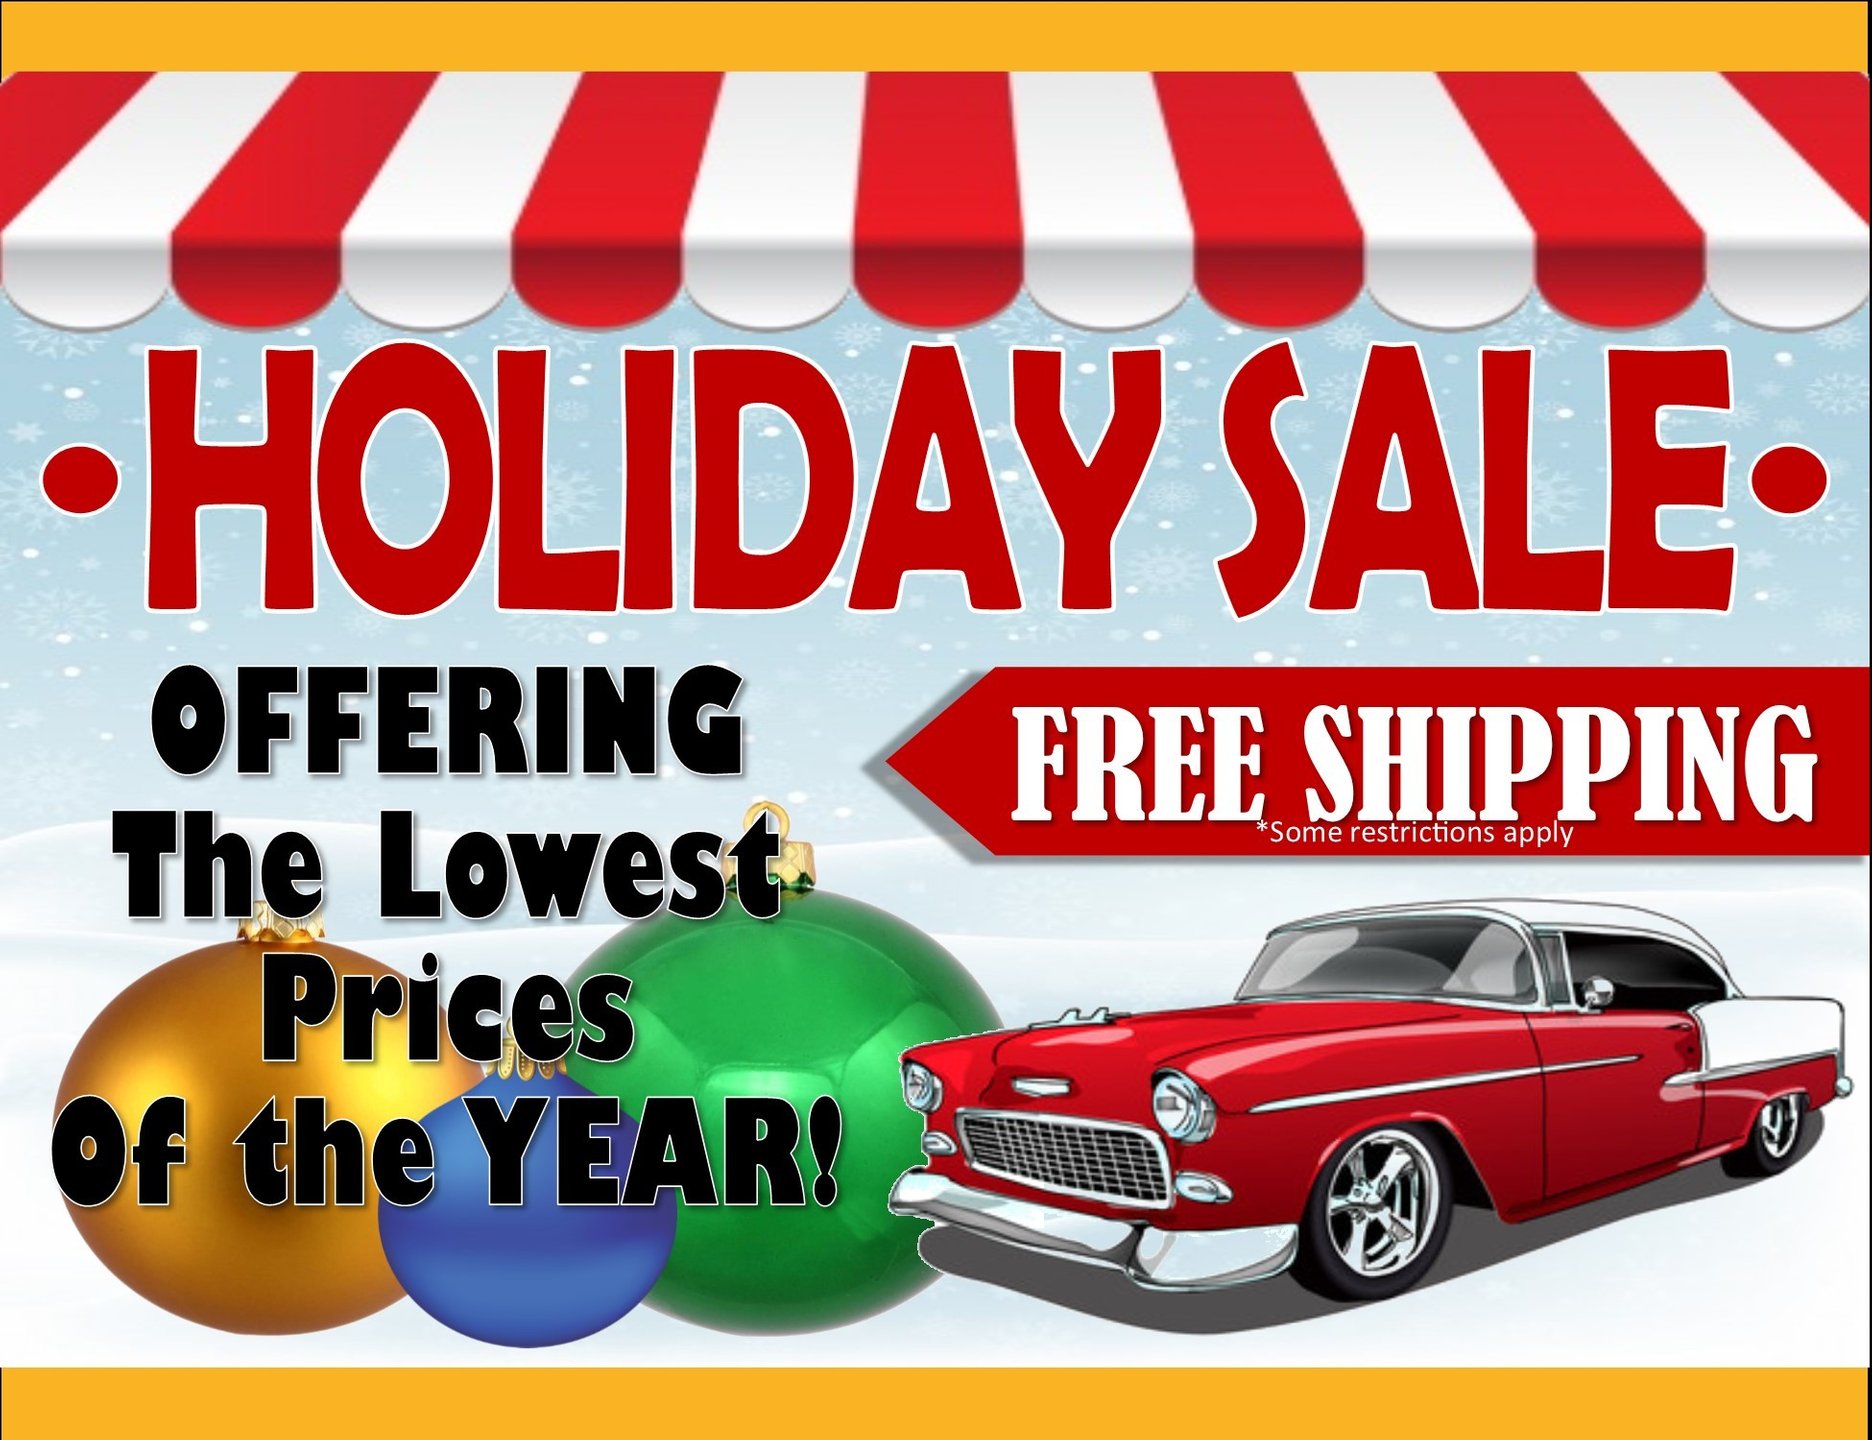 2018 smoky mountain traders holiday sale featuring free shipping